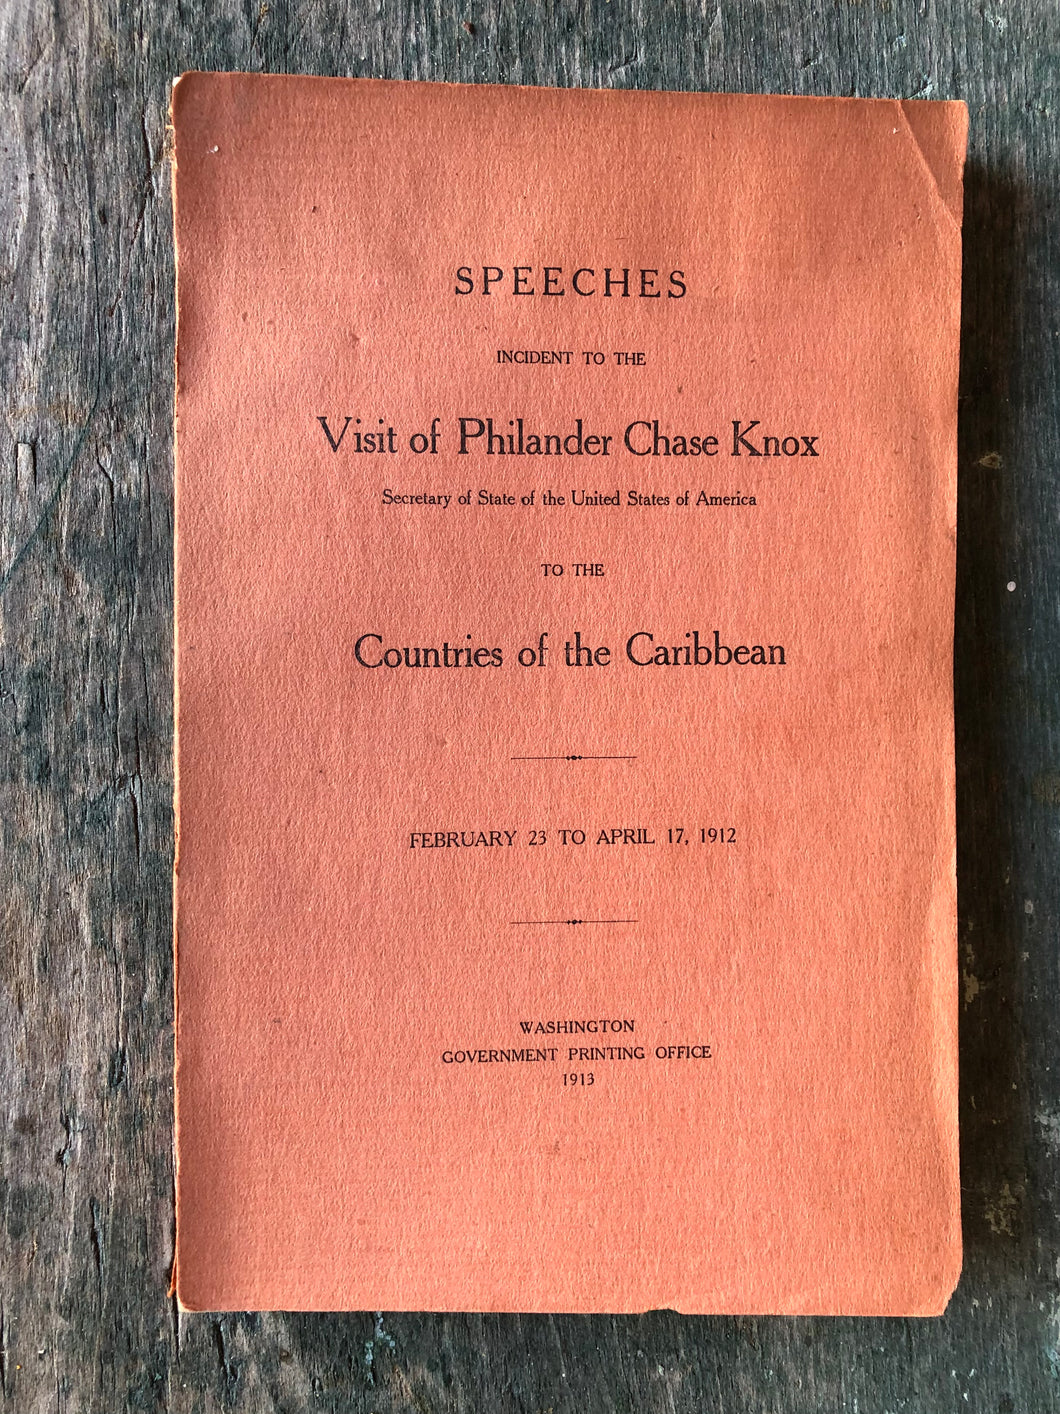 Speeches Incident to the Visit of Philander Chase Knox Secretary of State of the United States of America to the Countries of the Caribbean. February 23rd to April 17, 1912